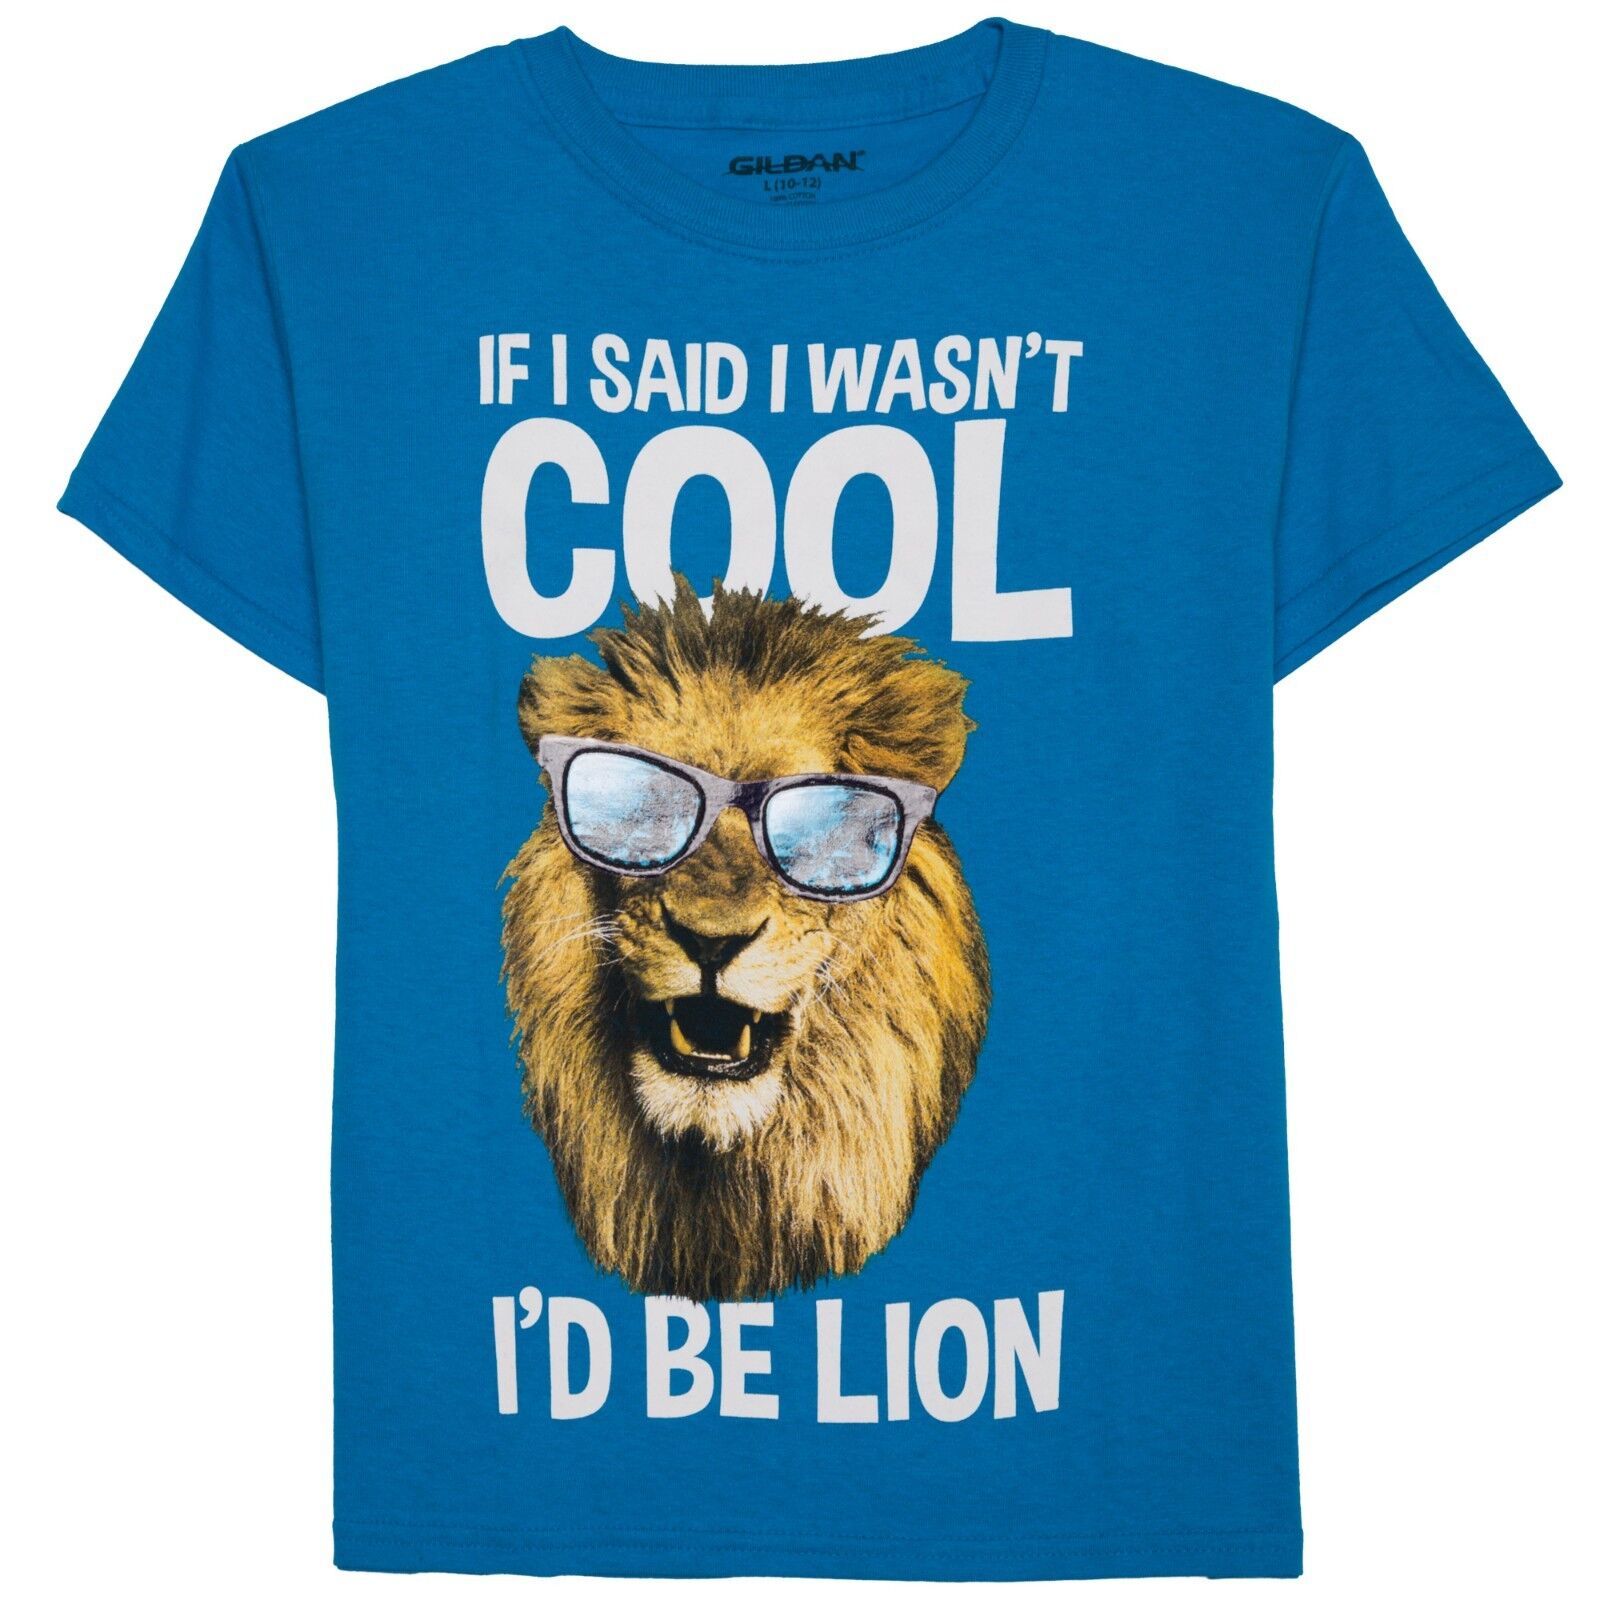 Primary image for Gildan Boy's T Shirt If I Said I Wasn't Cool I Would Be Lion Size XXL (18) Blue